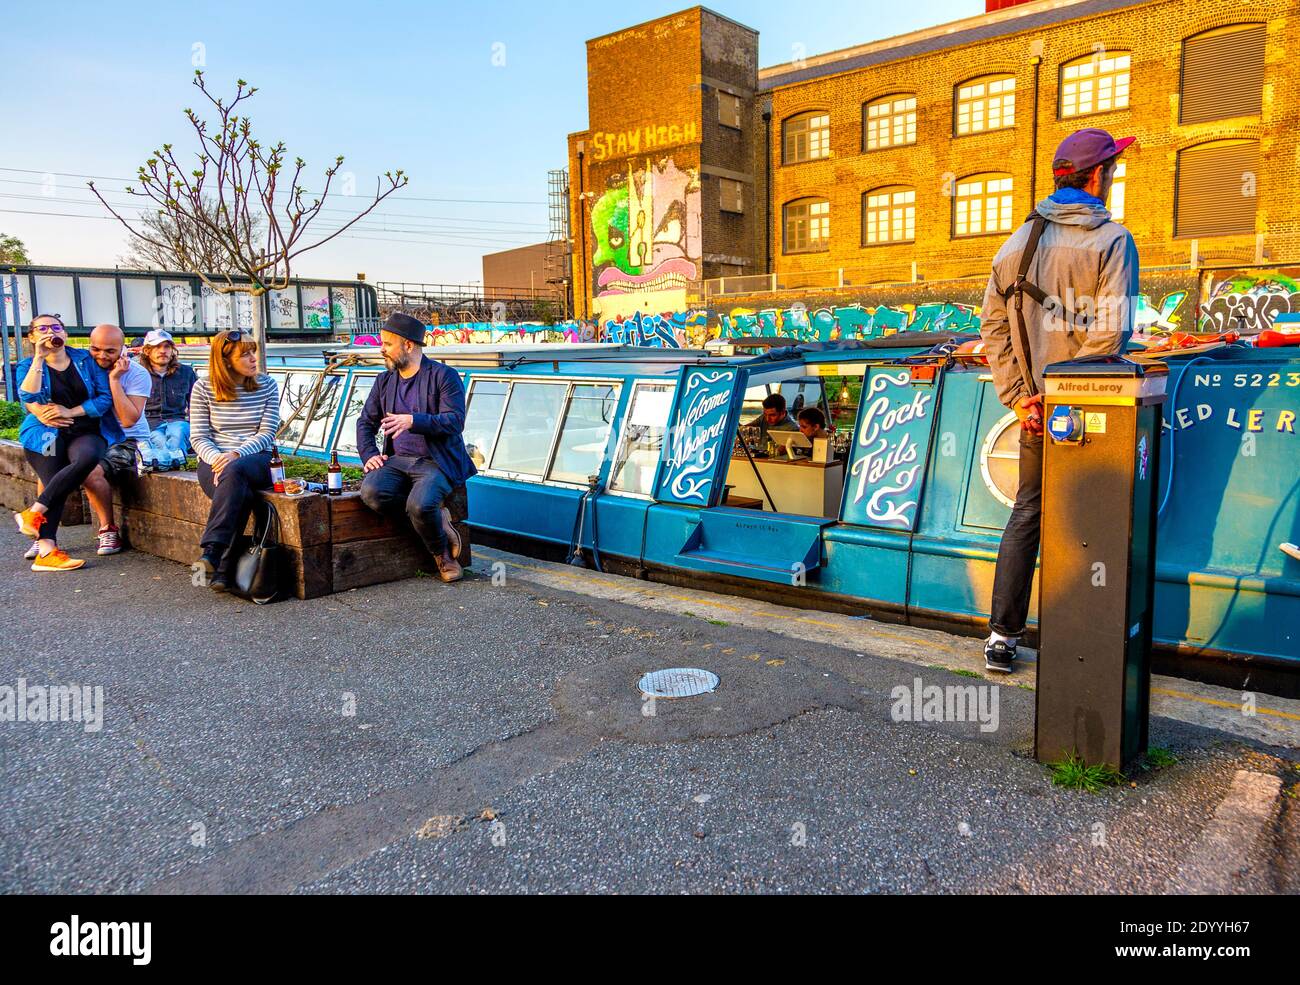 Alfred Le Roy Cocktail barge and people drinking outside CRATE Brewery & Pizzeria on the River Lee Navigation Canal, Hackney Wick, London, UK Stock Photo